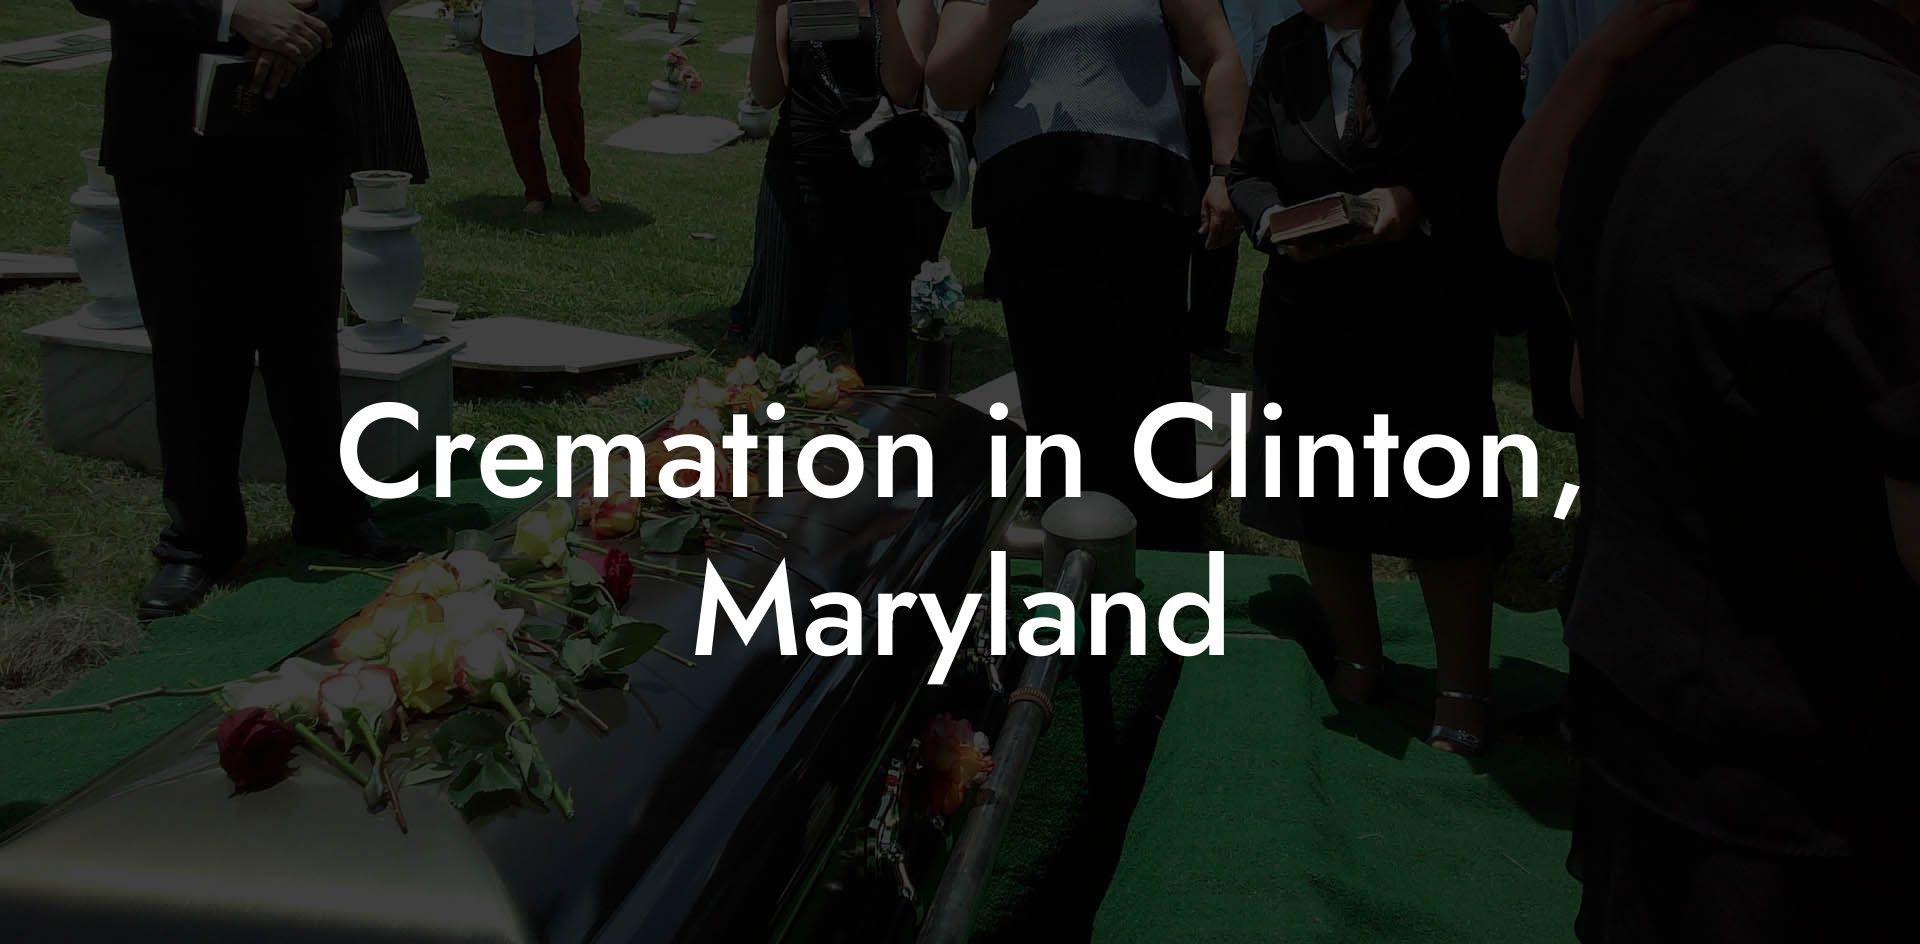 Cremation in Clinton, Maryland